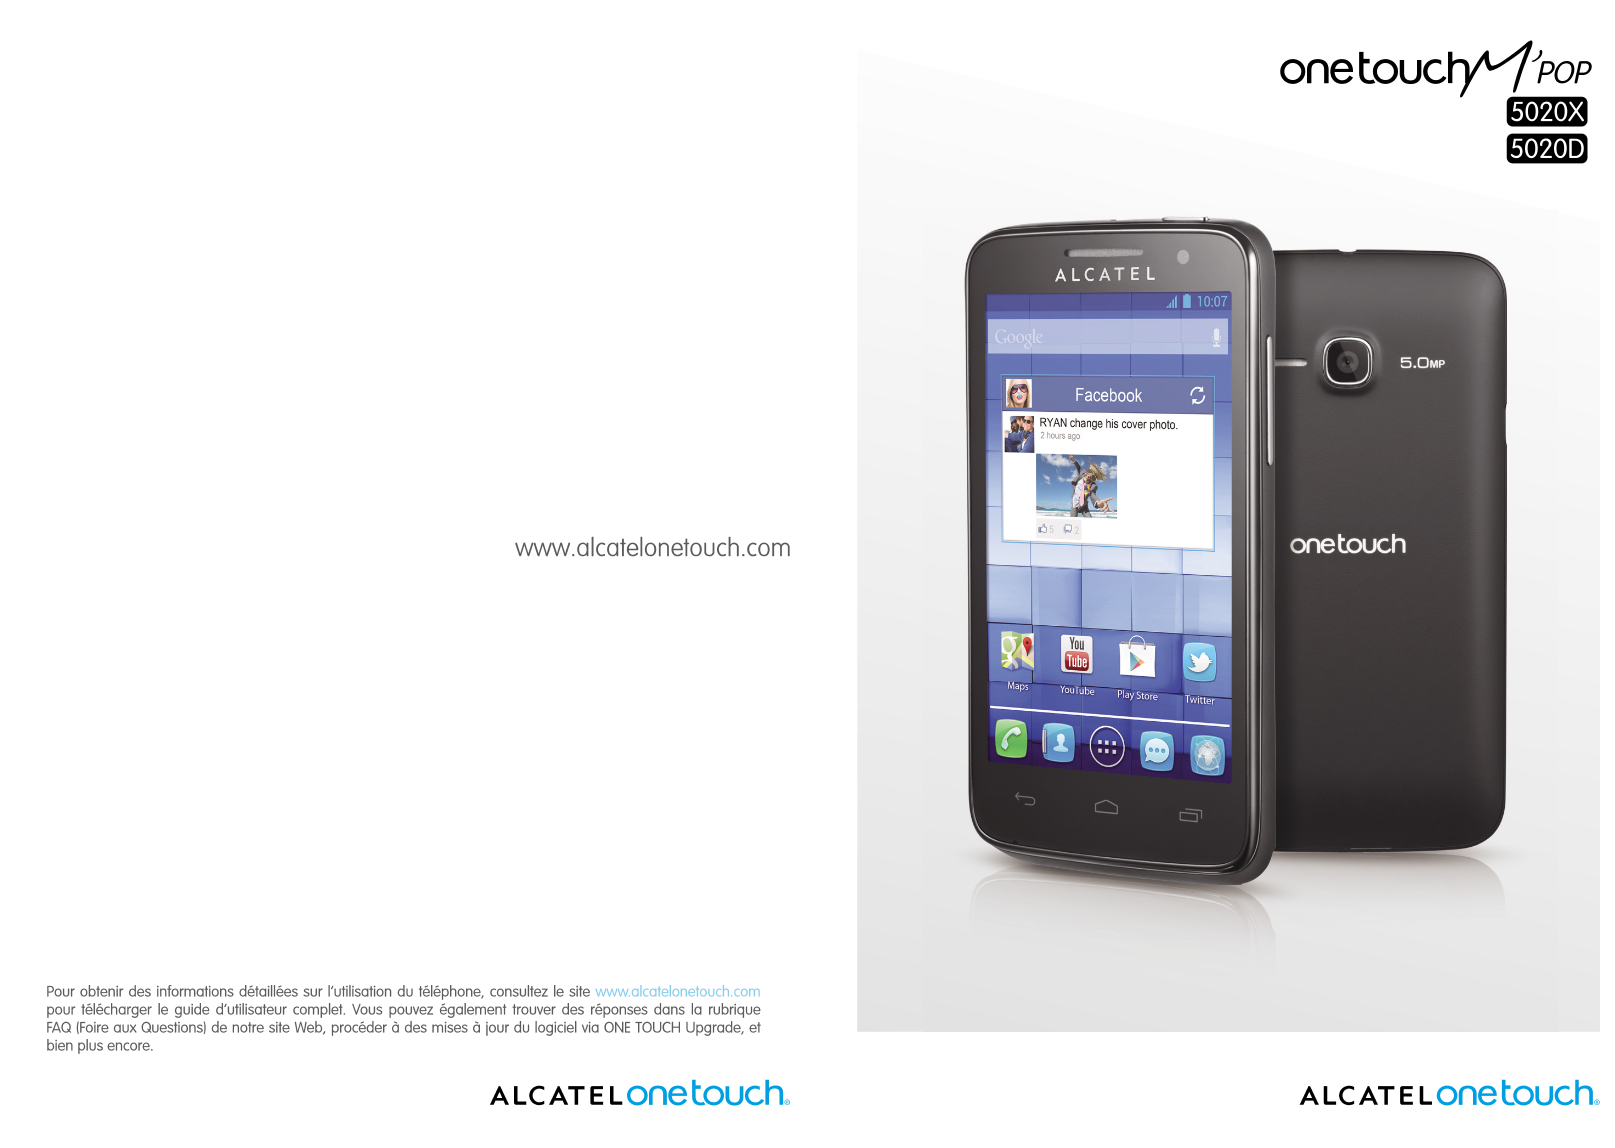 - Alcatel One Touch M'Pop Android 4.1 - Device Guides